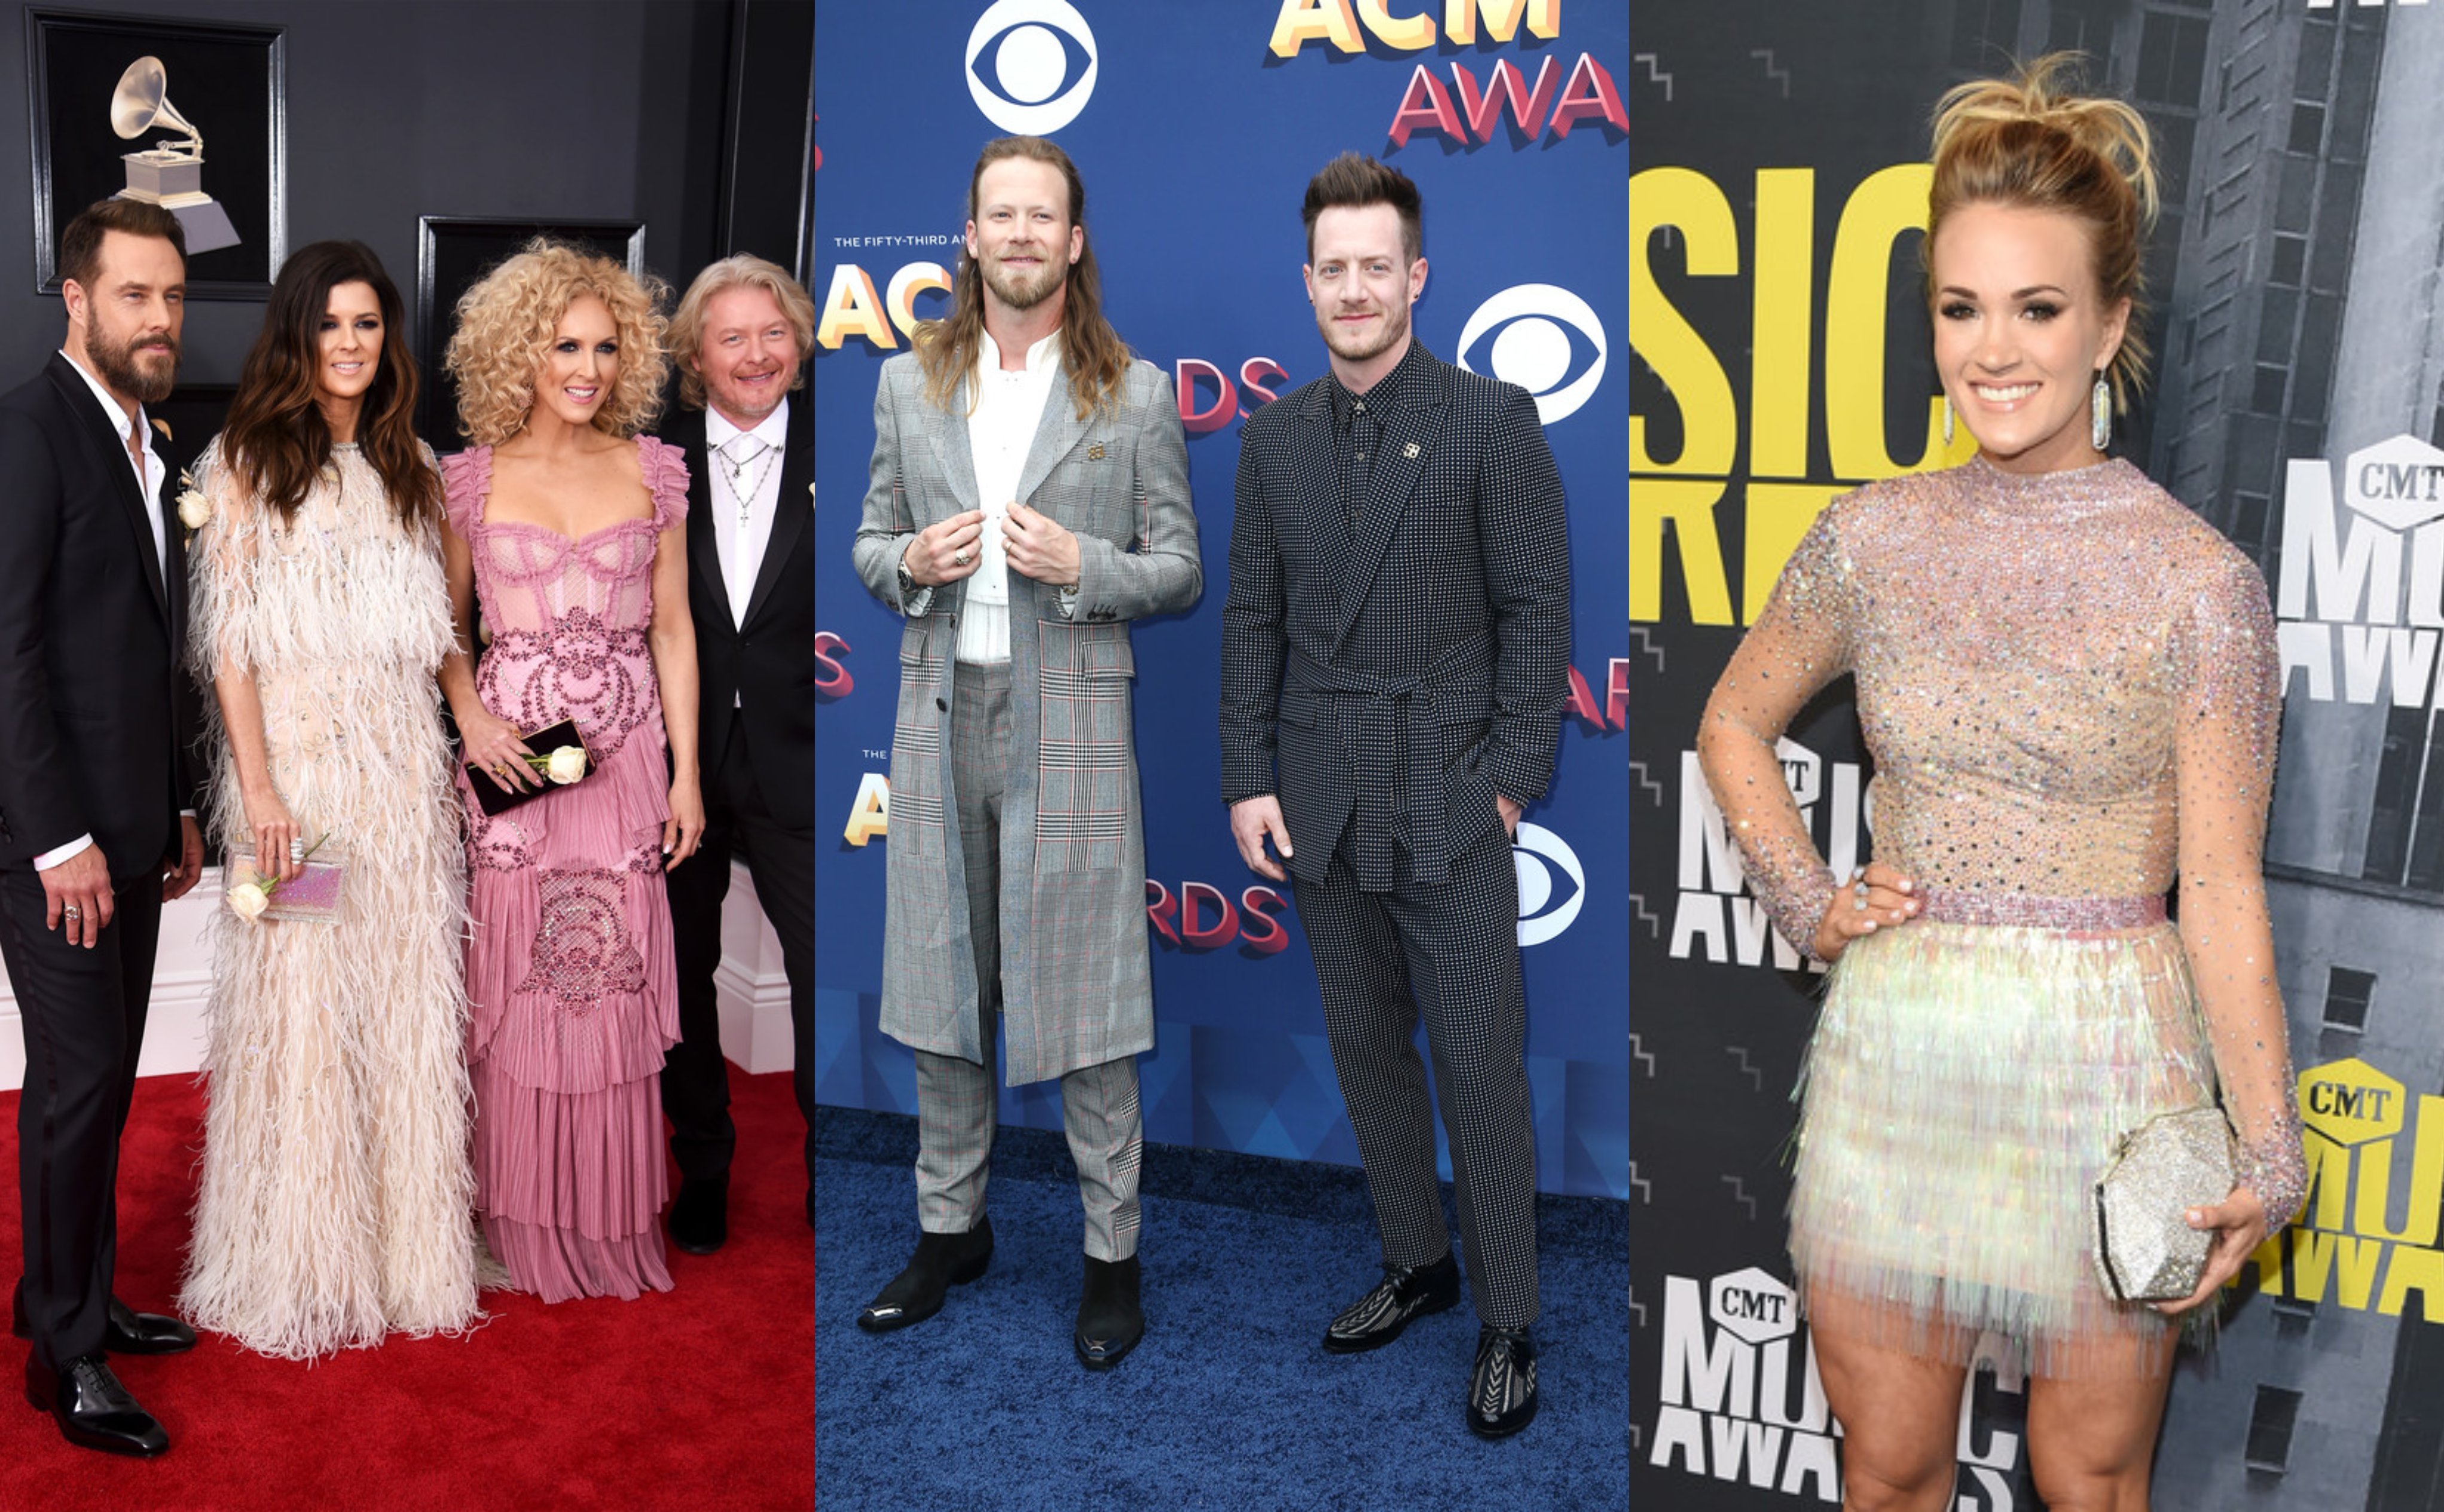 Backstreet Boys, Carrie Underwood, Florida Georgia Line, Little Big Town to Perform at the 2018 CMT Music Awards